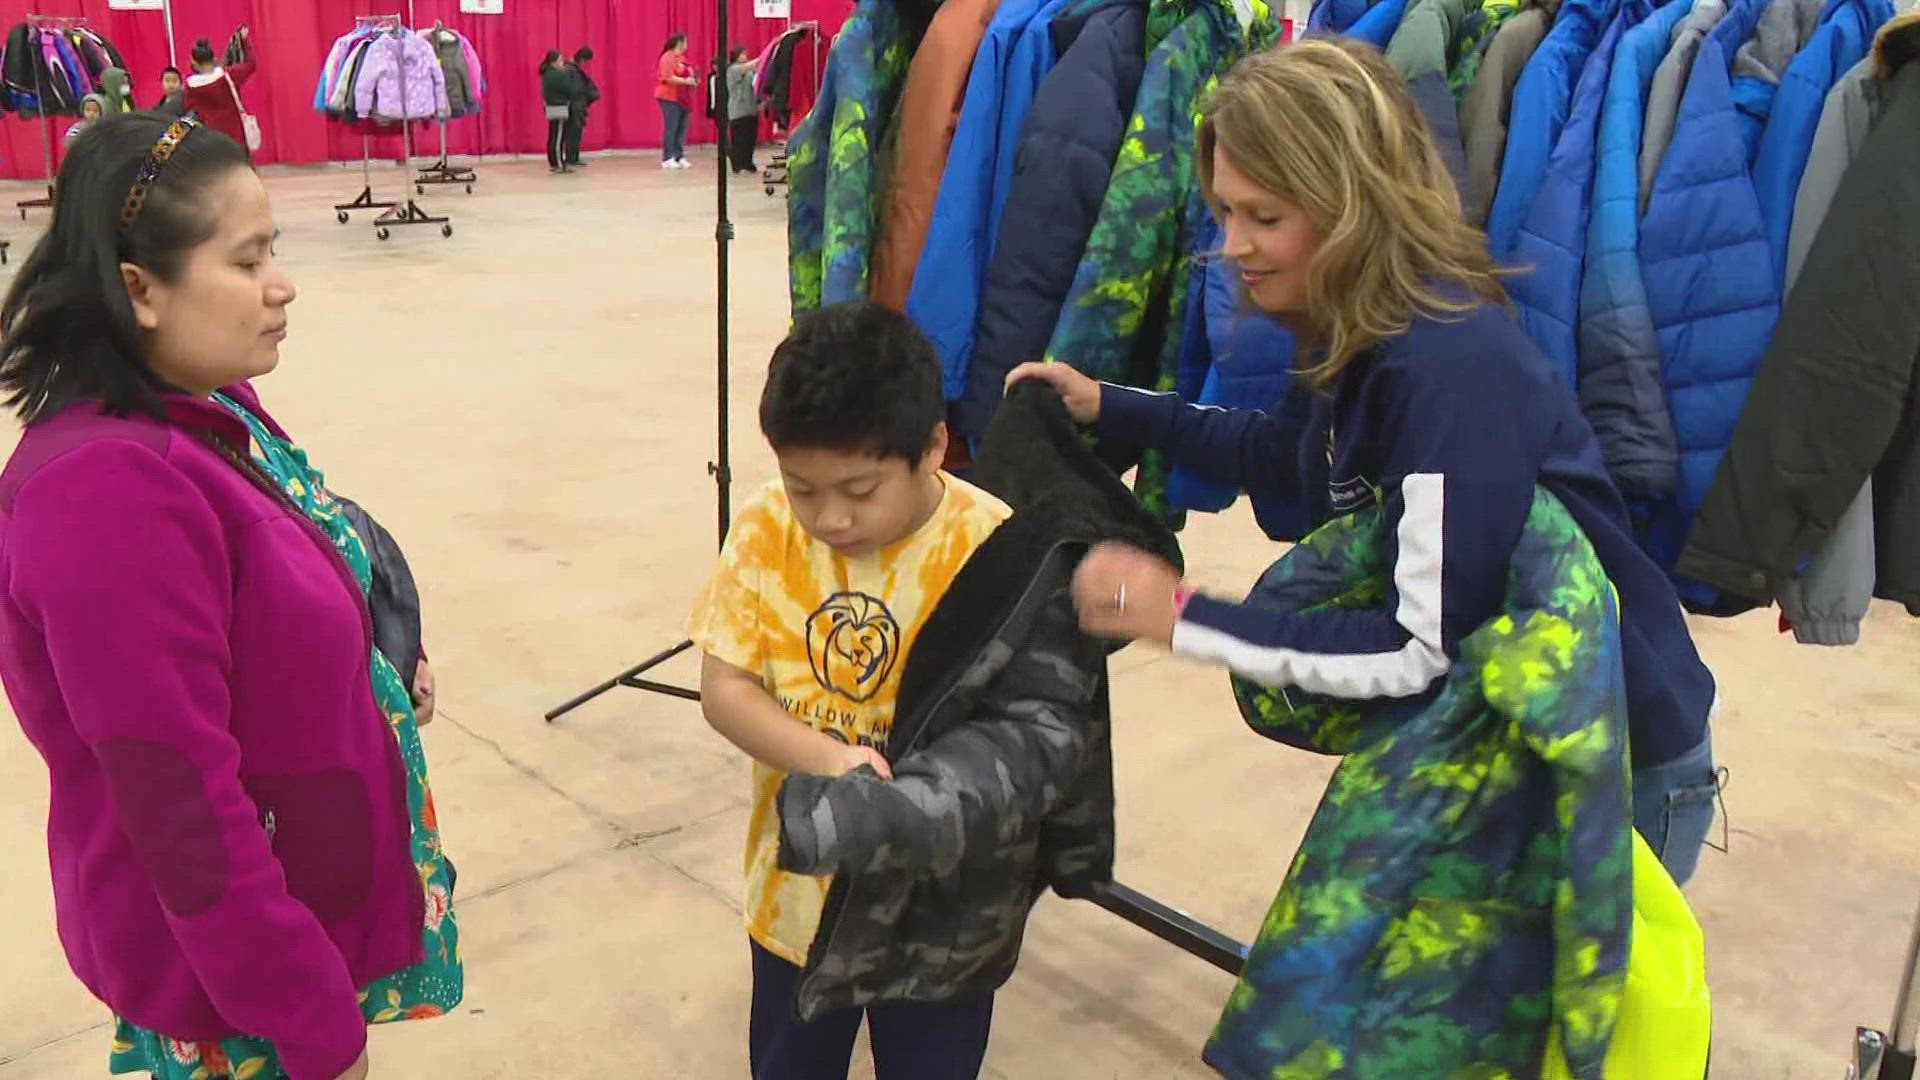 The 13News crew served as shoppers, helping kids pick out coats.